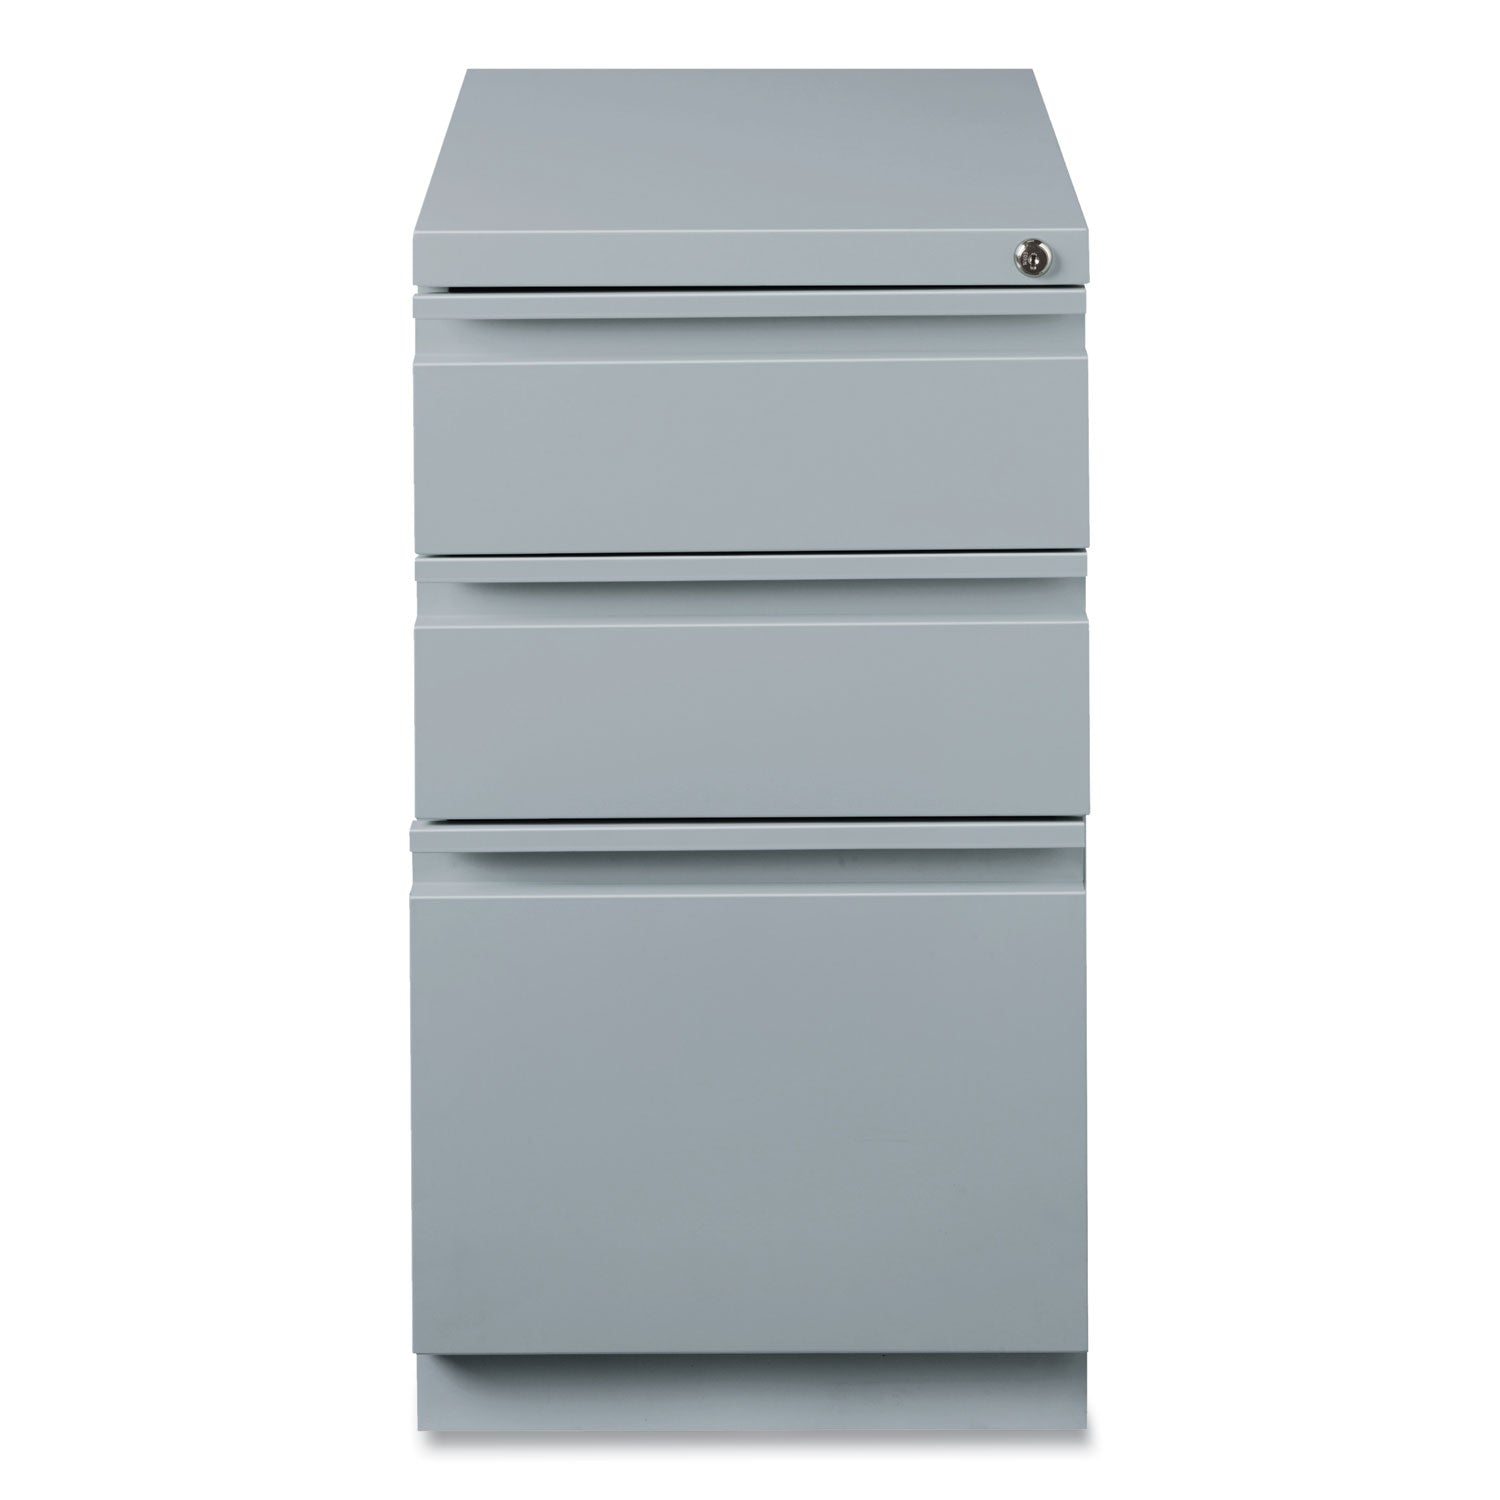 full-width-pull-20-deep-mobile-pedestal-file-box-box-file-letter-platinum-15-x-1988-x-2775-ships-in-4-6-business-days_hid21856 - 2